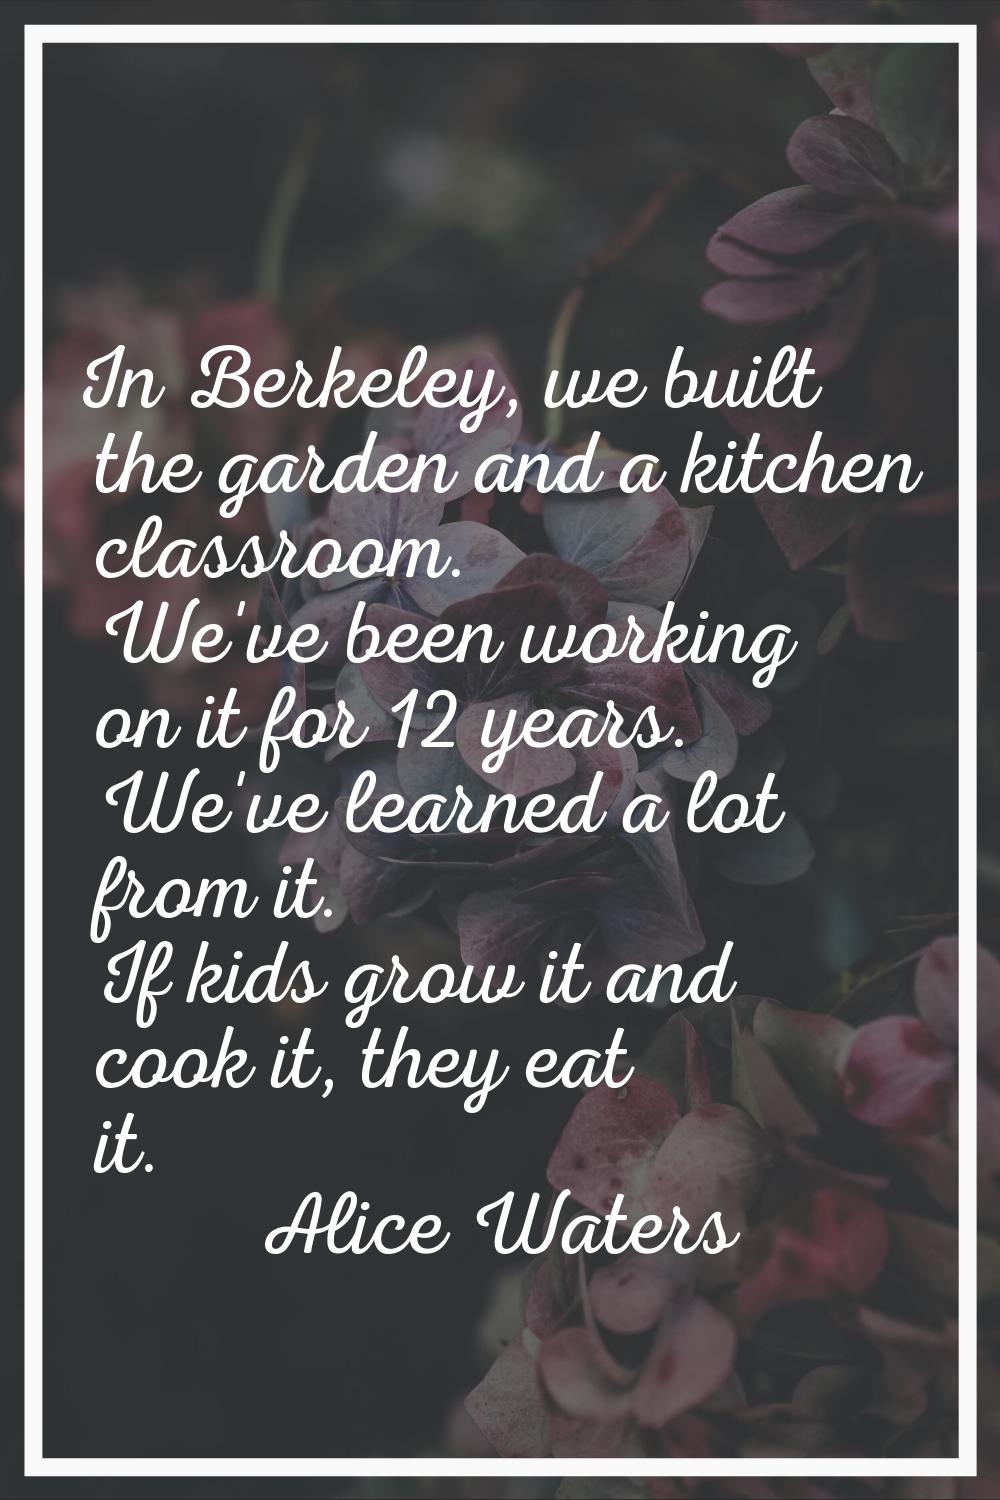 In Berkeley, we built the garden and a kitchen classroom. We've been working on it for 12 years. We